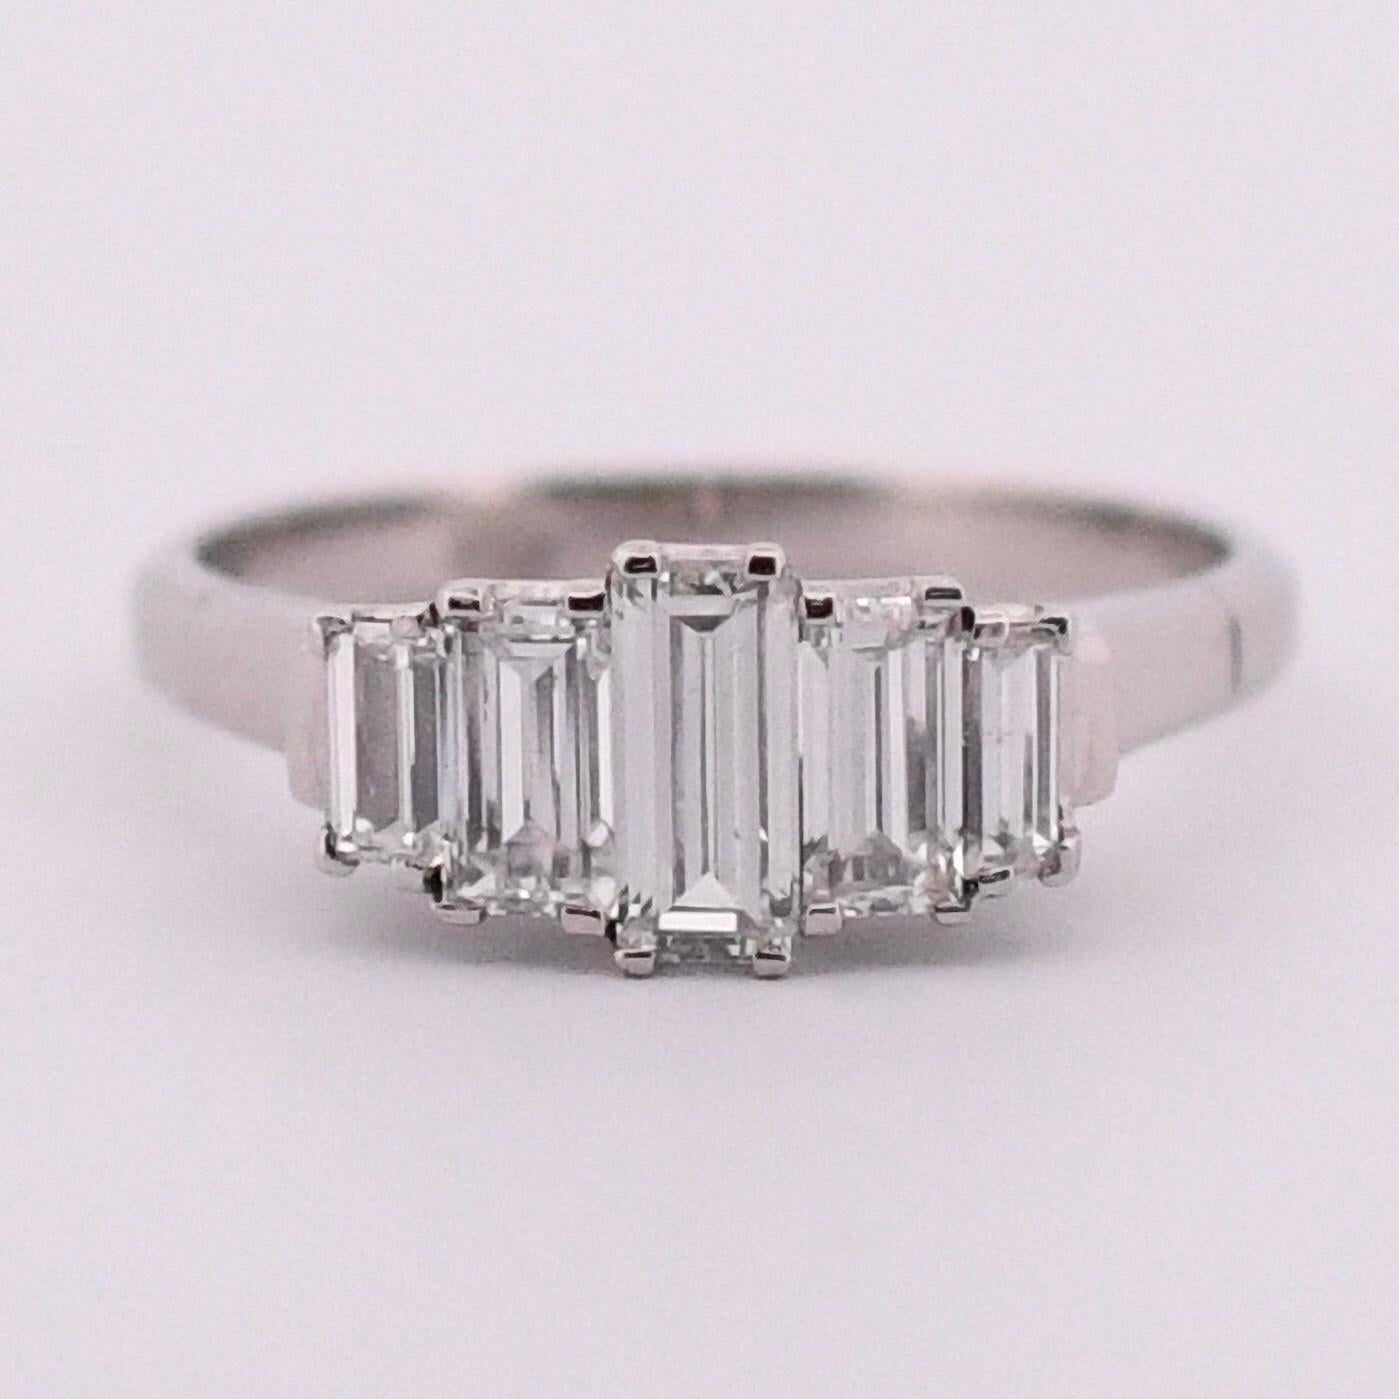 Exuding timeless charm, this platinum vintage ring showcases refined simplicity and exceptional craftsmanship. Its tapered shanks lead to a classic gallery adorned with five exquisite F-colored baguette diamonds. Ideal as an engagement ring matched